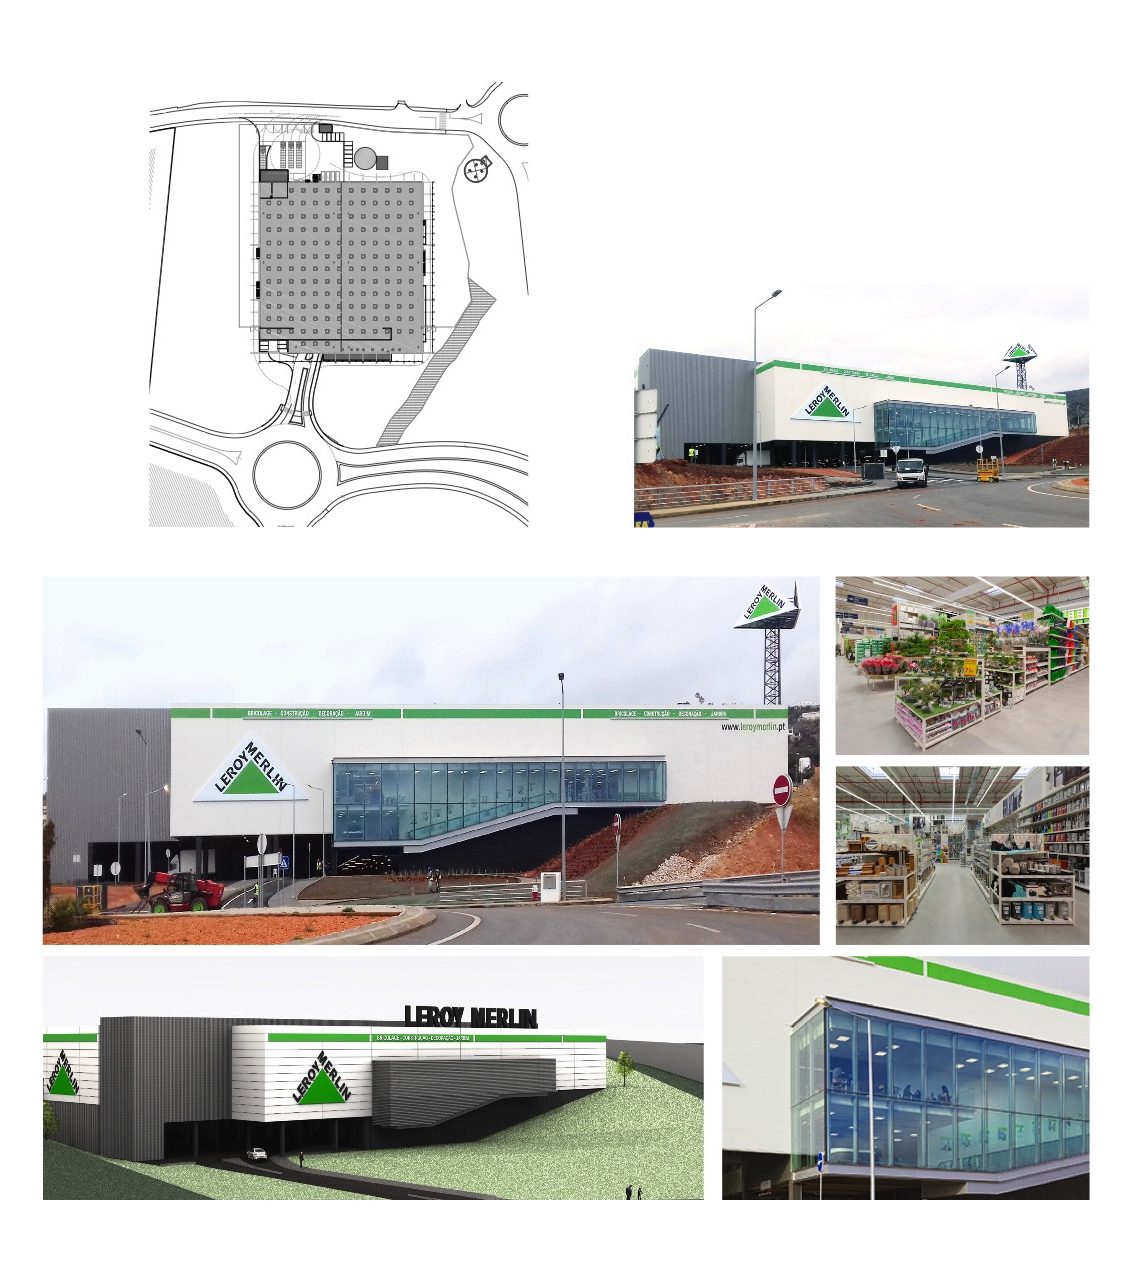 Leroy Merlin Store, Loulé – Brimogal Sociedade Imobiliária S.A. – 23906 sq m of gross building area and 415 parking spaces on a plot of 22906 sq m.